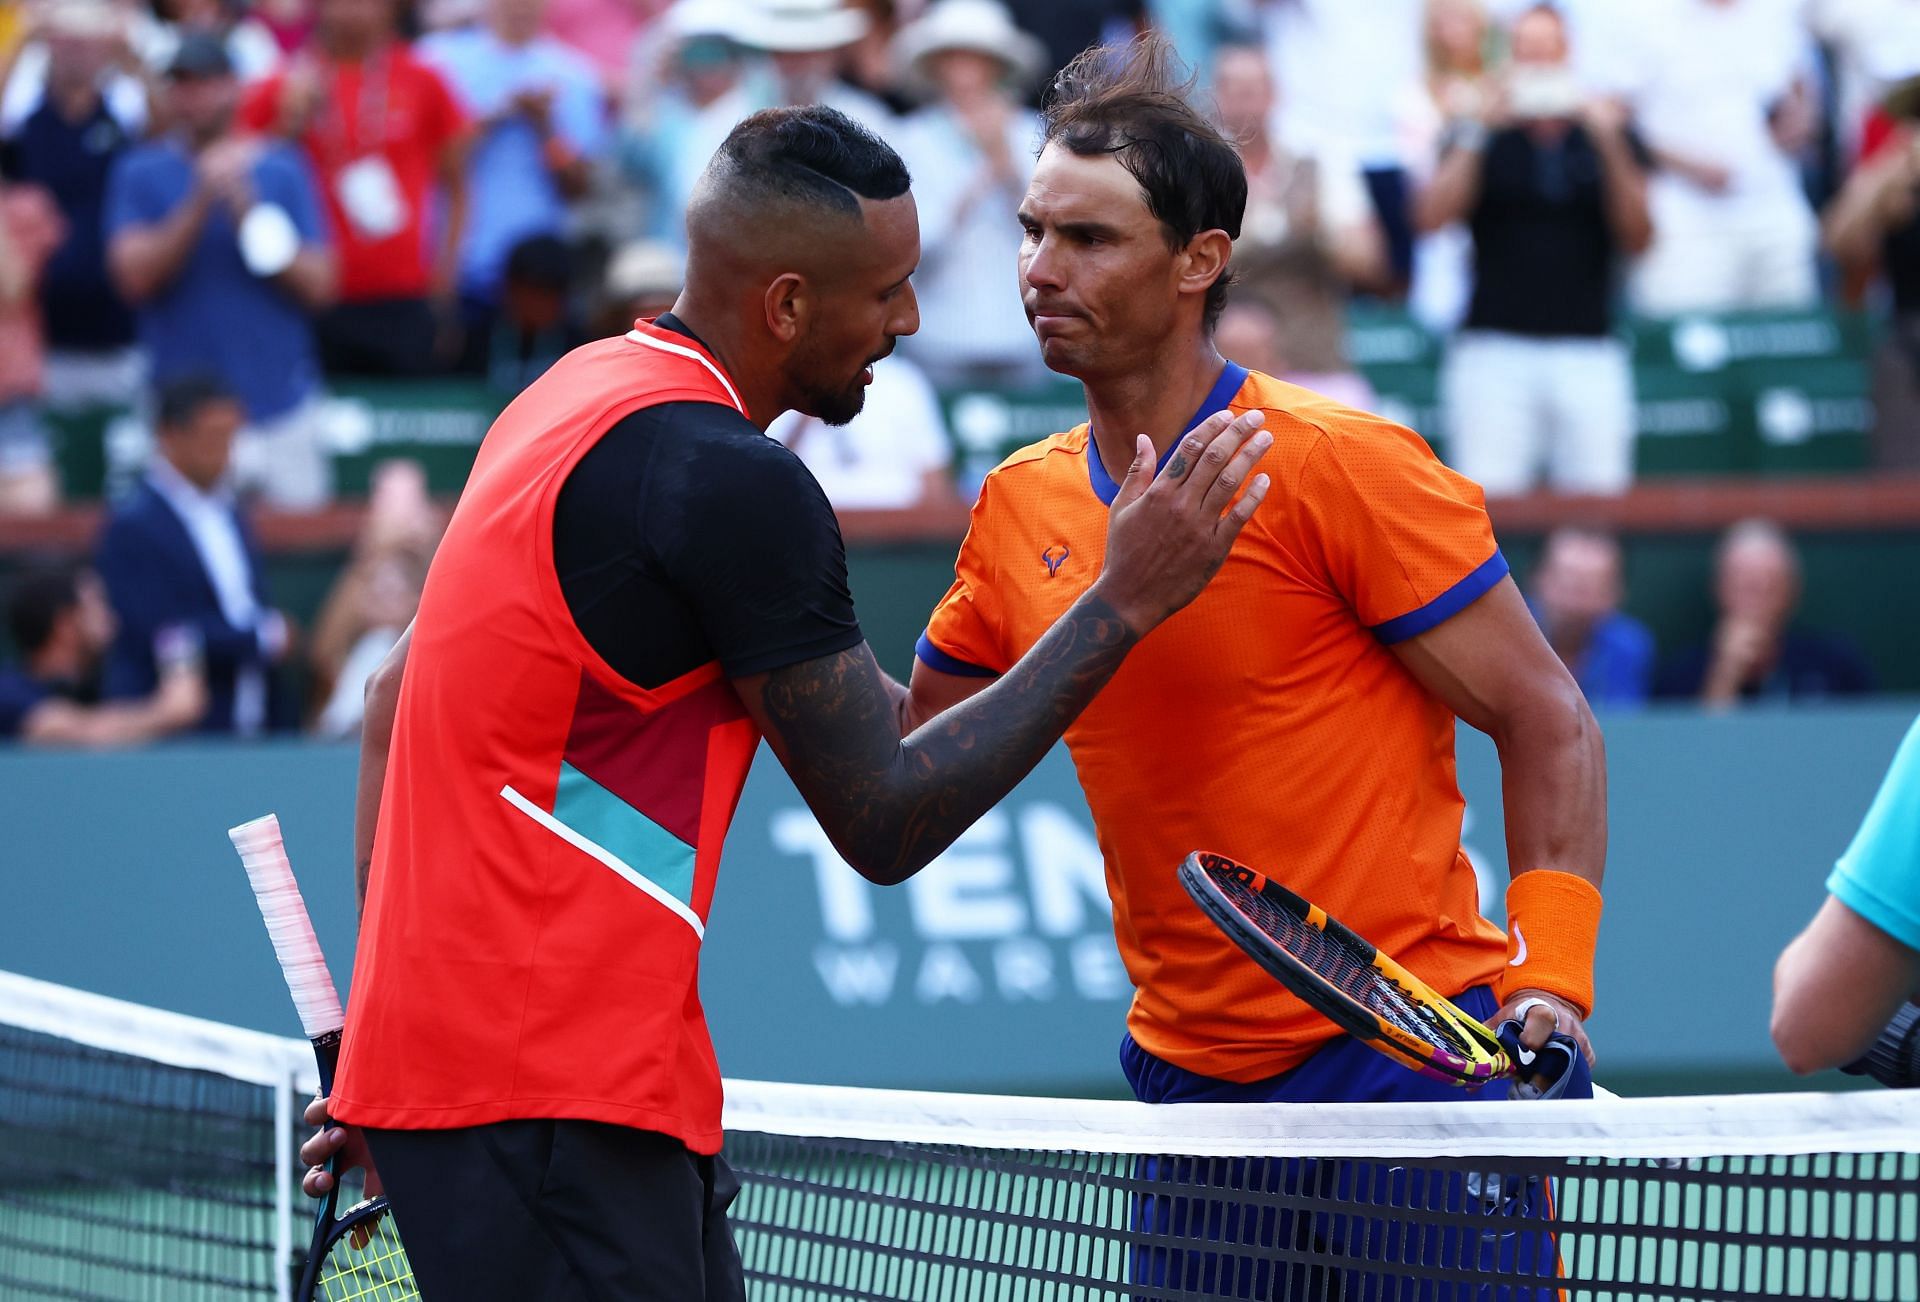 Nick Kyrgios and Rafael Nadal pictured at the BNP Paribas Open - Day 11.